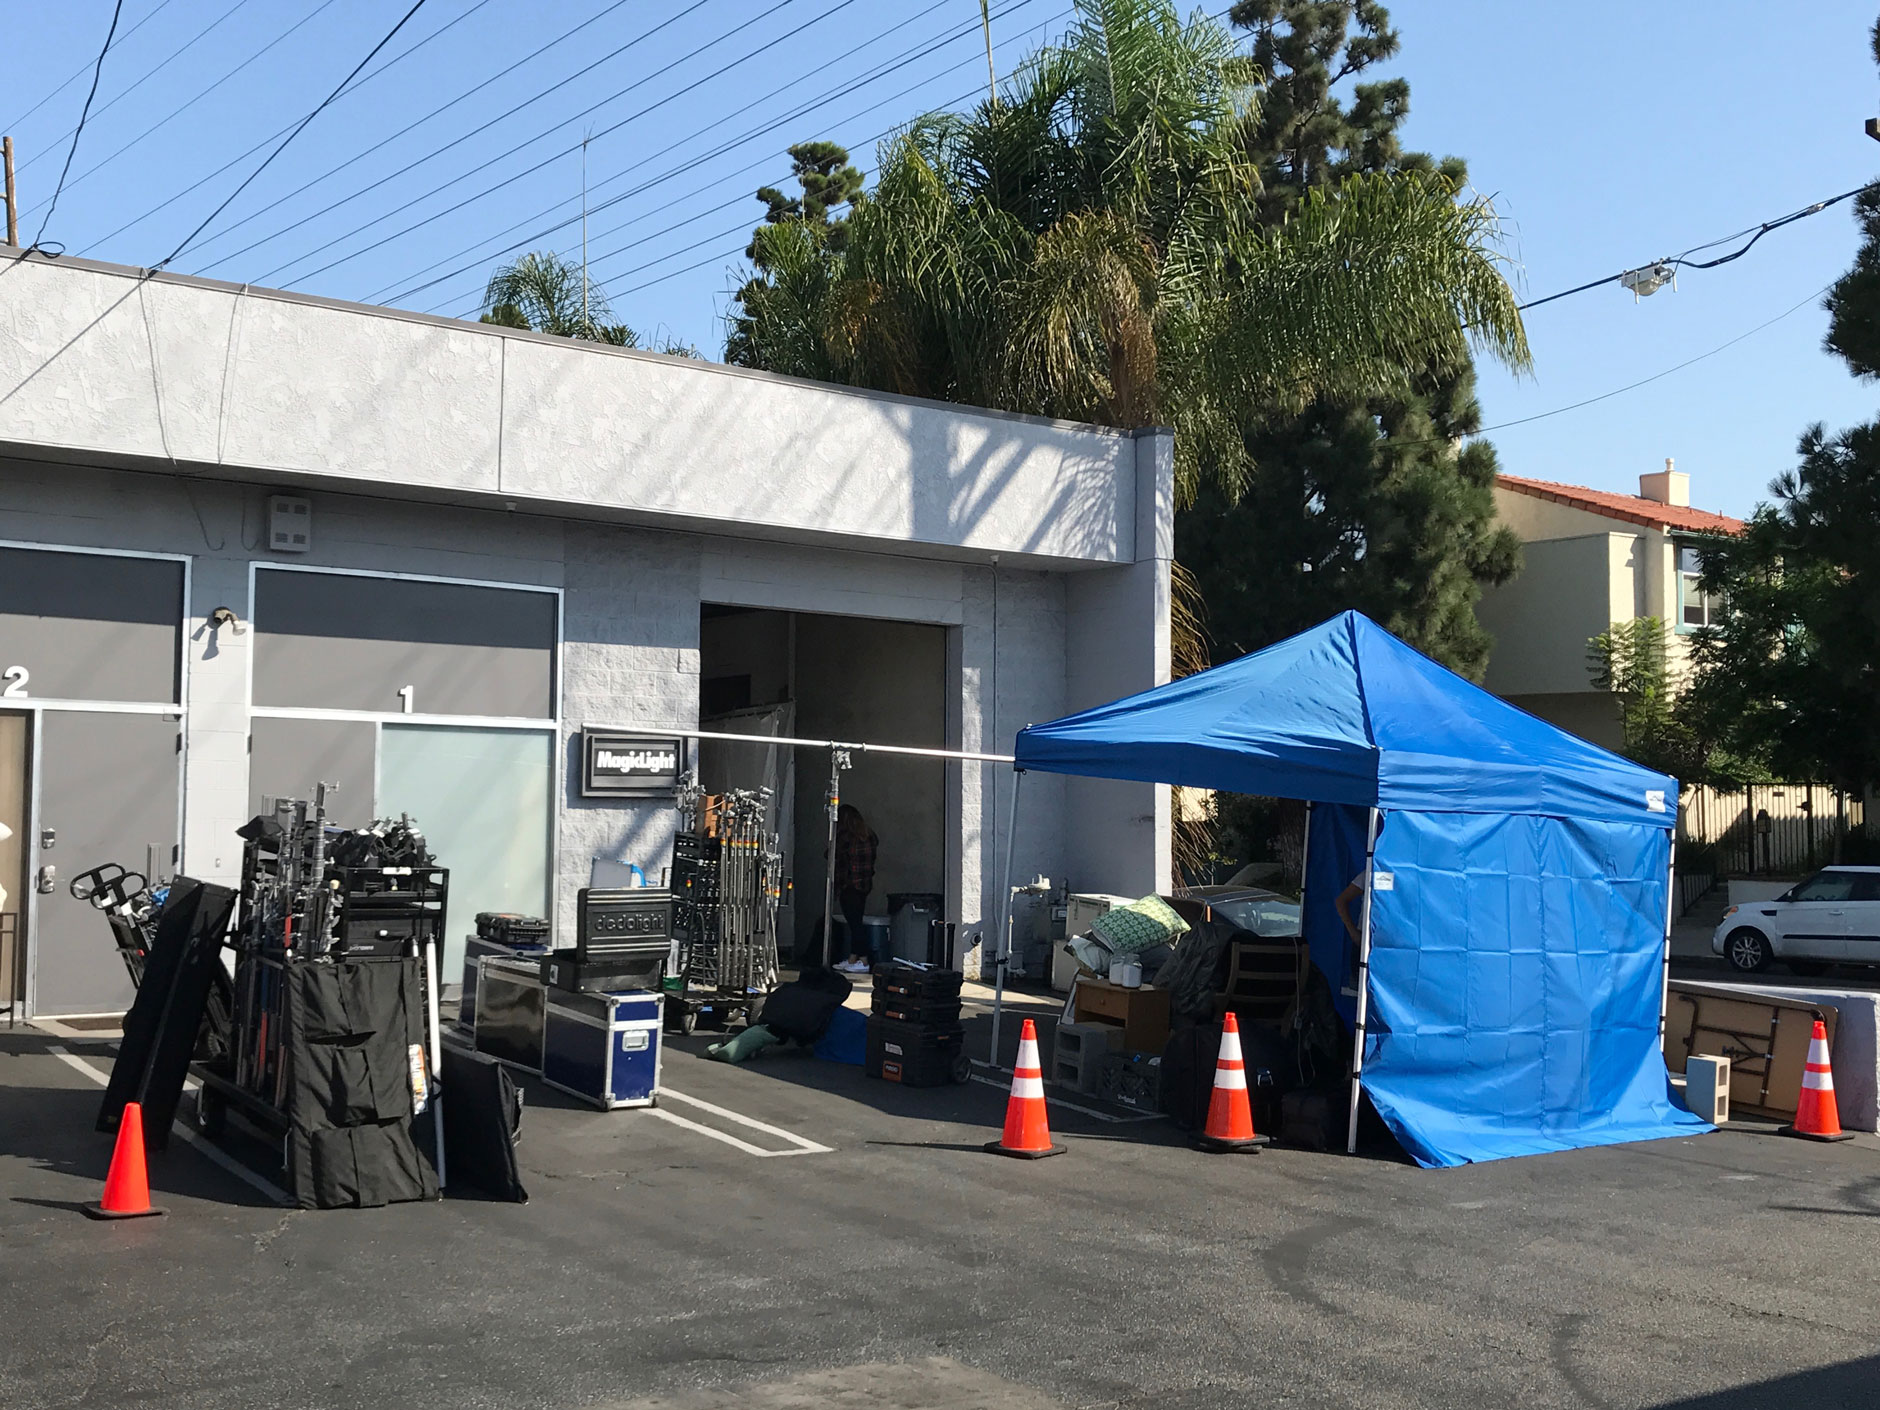 Rental Studio with Outdoor area for  PopUp Lunch in-parking-lot